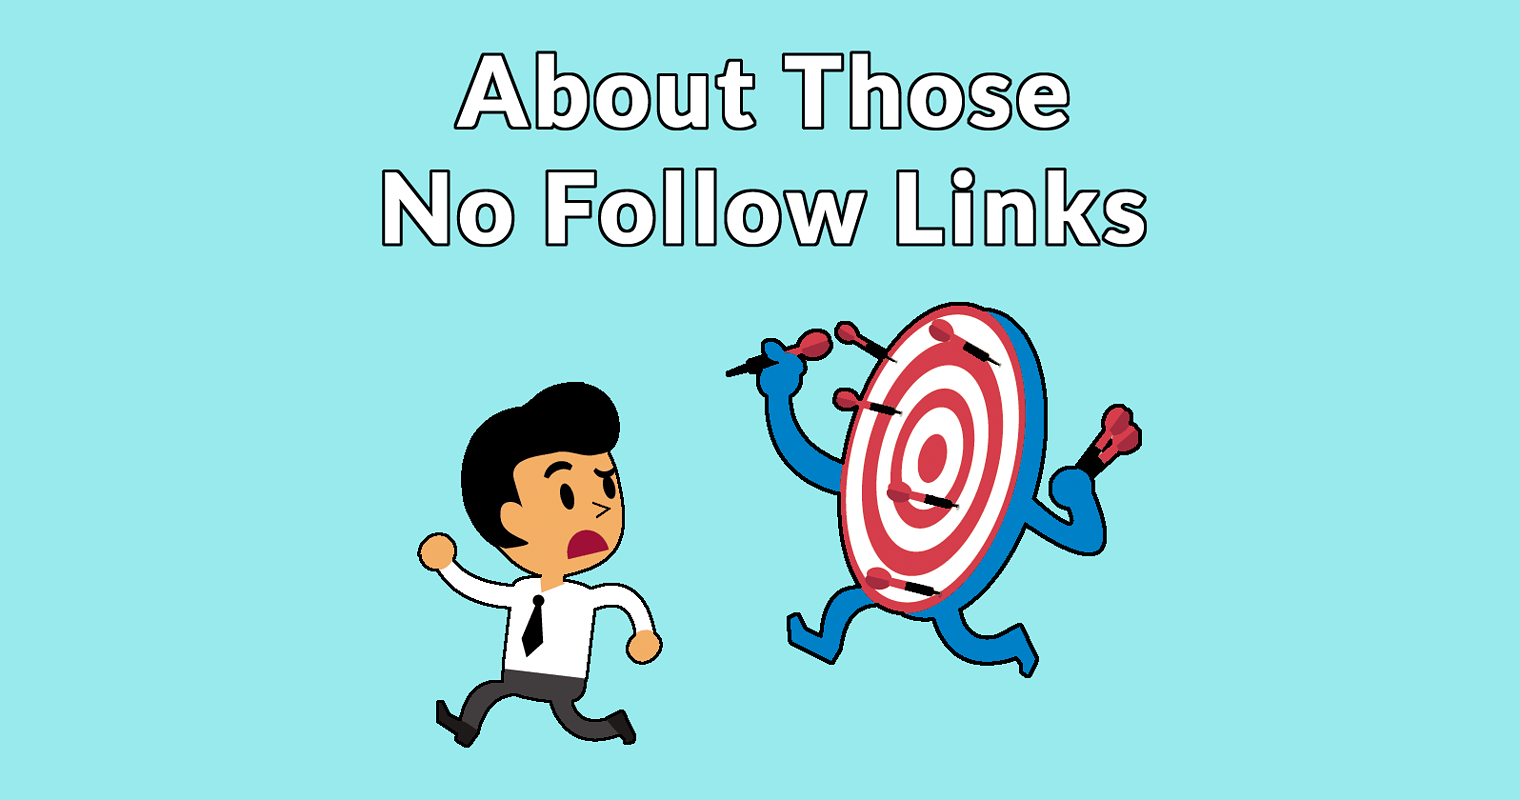 No Follow Links and Search Ranking